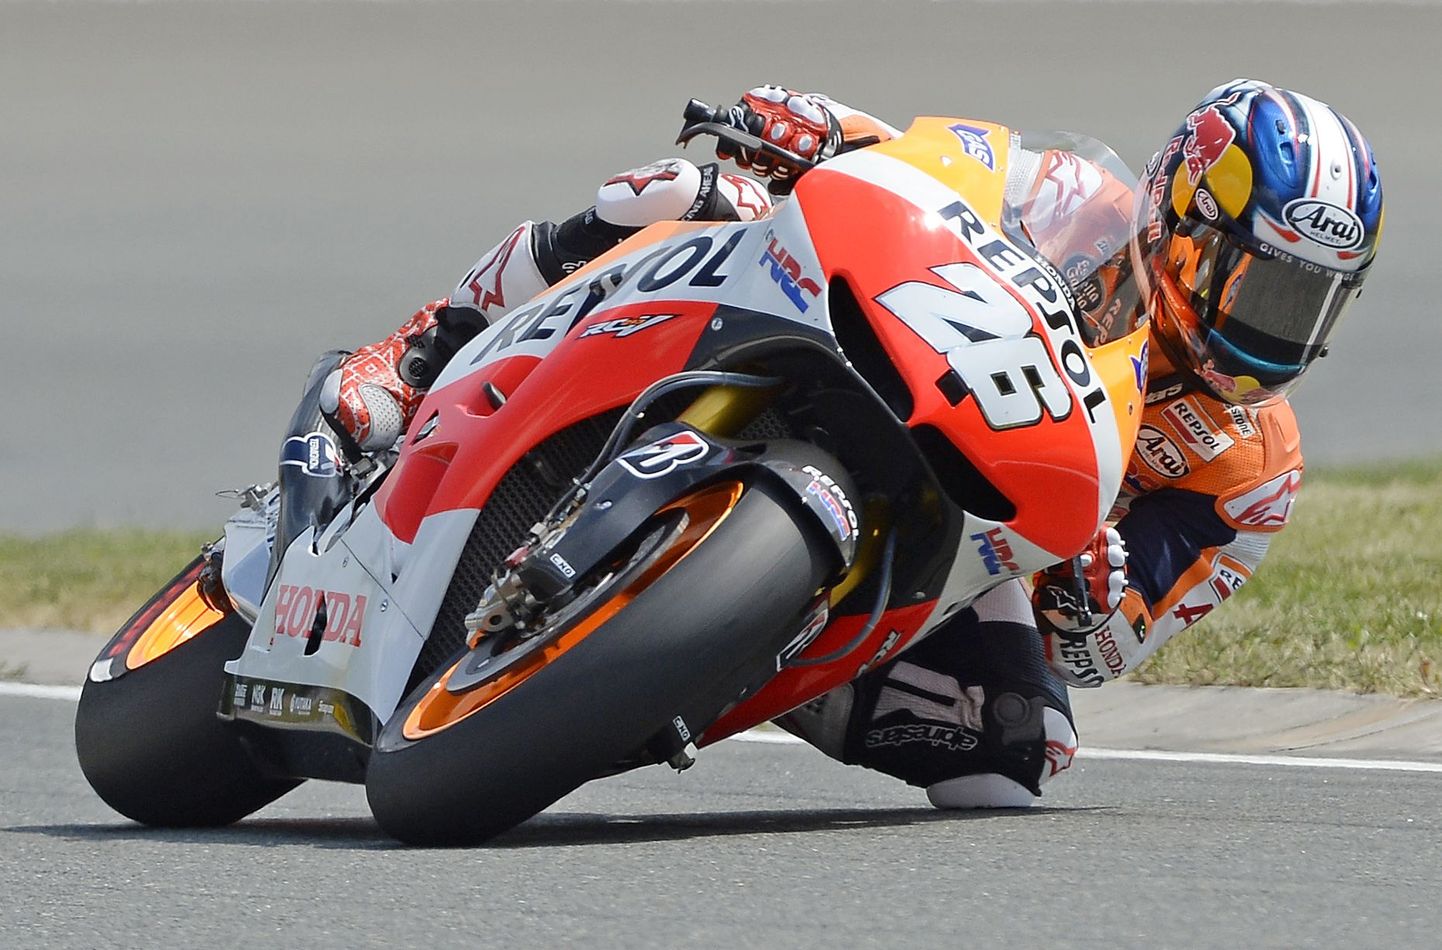 World Cup leader and Honda rider Dani Pedrosa of Spain speeds up during the MotoGP free practice at the Sachsenring circuit in Hohenstein-Ernstthal, near the city of Chemnitz, Germany, Friday, July 12, 2013. The Motorcycle Grand Prix of Germany is scheduled for Sunday, July 14 2013. (AP Photo/Jens Meyer) / SCANPIX Code: 436